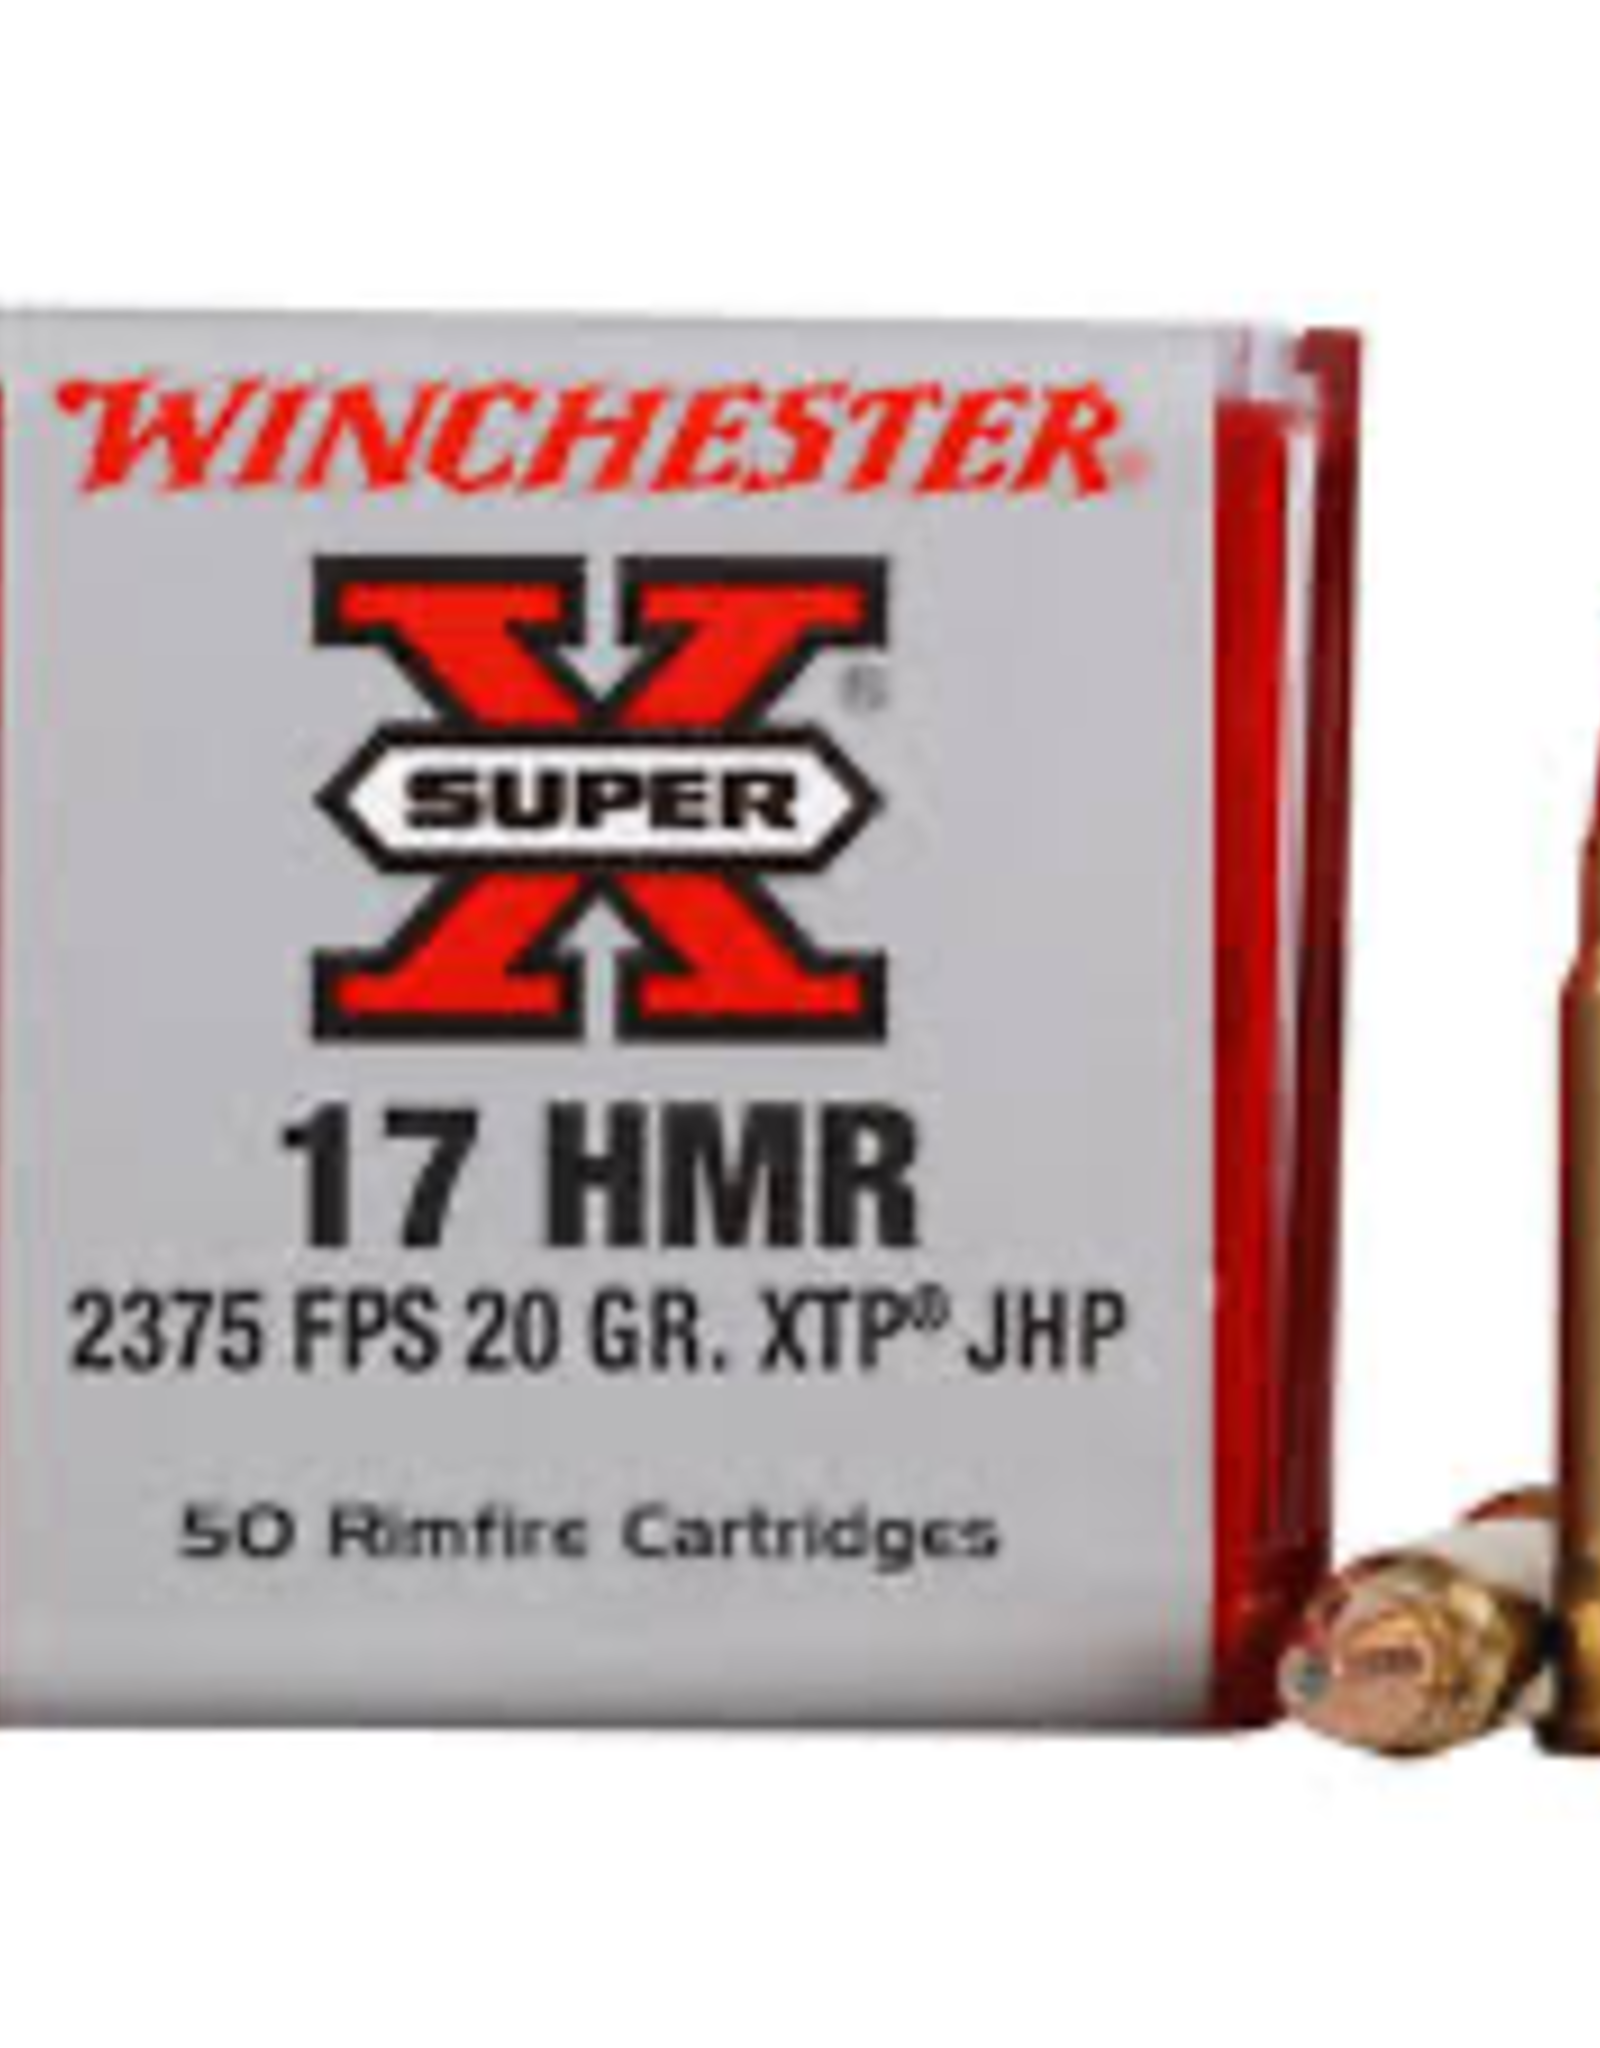 Winchester 17 HMR 20GR 2375 FPS JACKETED HOLLOW POINT